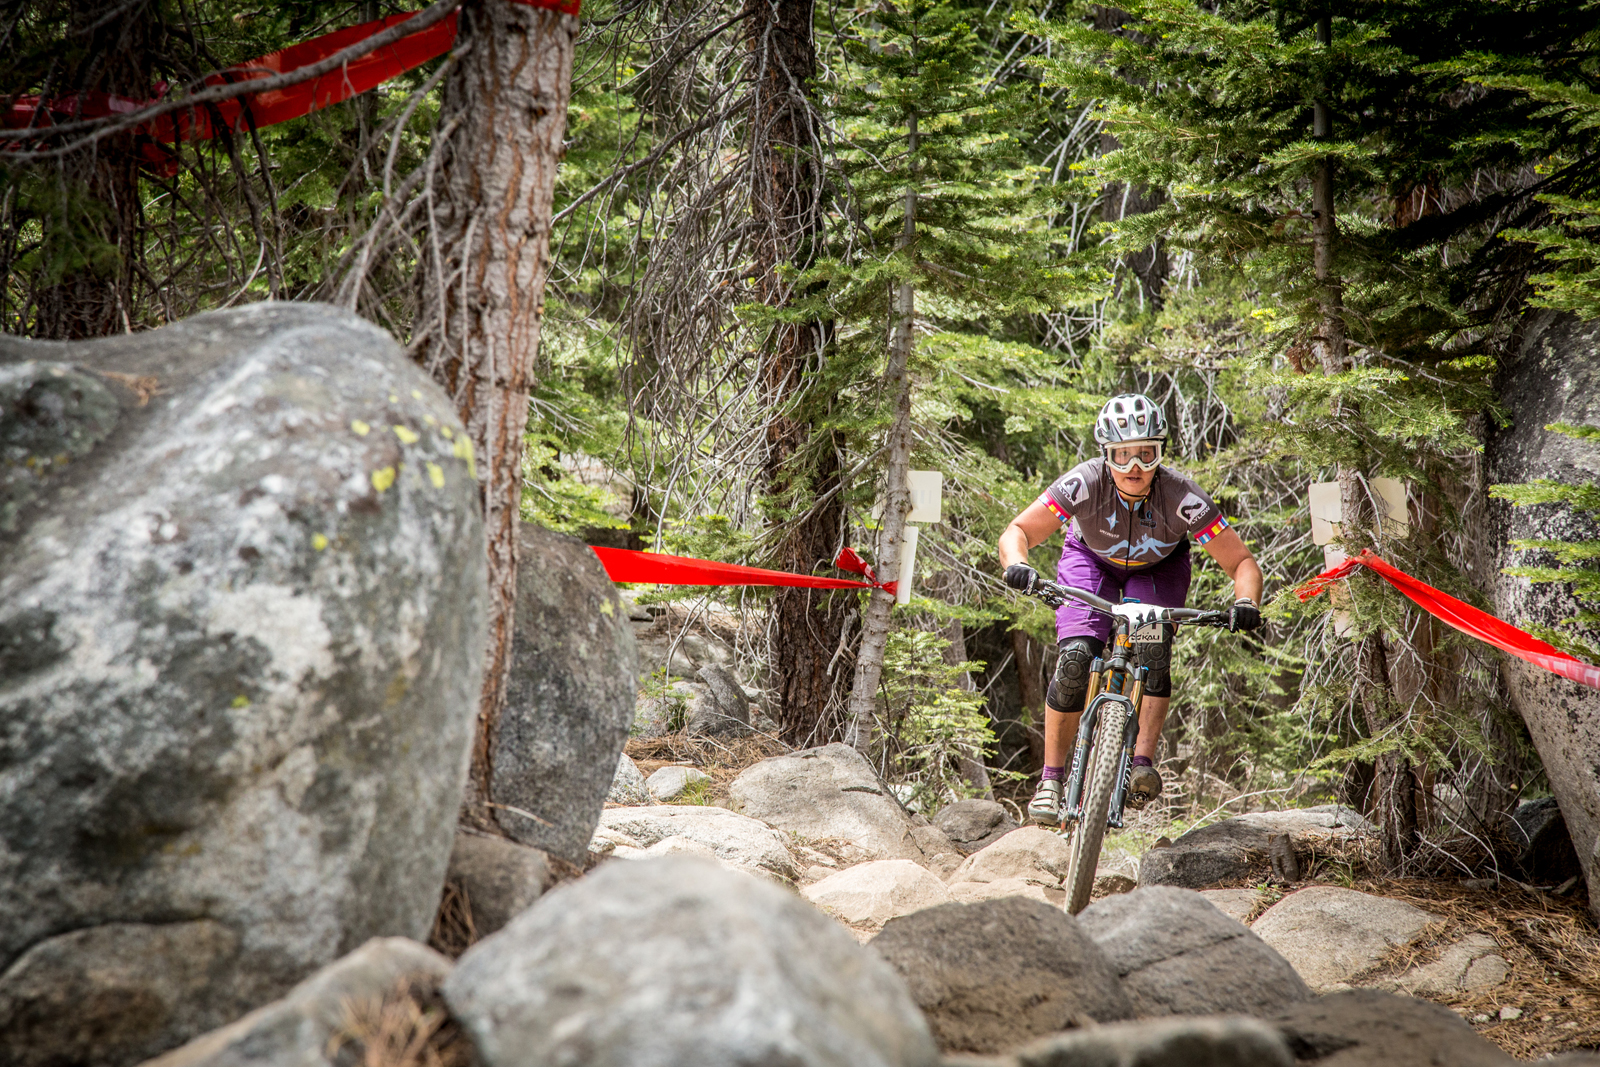 Loose dirt and chunky rocks set the tone for the race. Amy Morrison (Mike's Bikes) crushed the stage 3 tech gnar to a 2nd place pro womens win. Photo by Called To Creation.